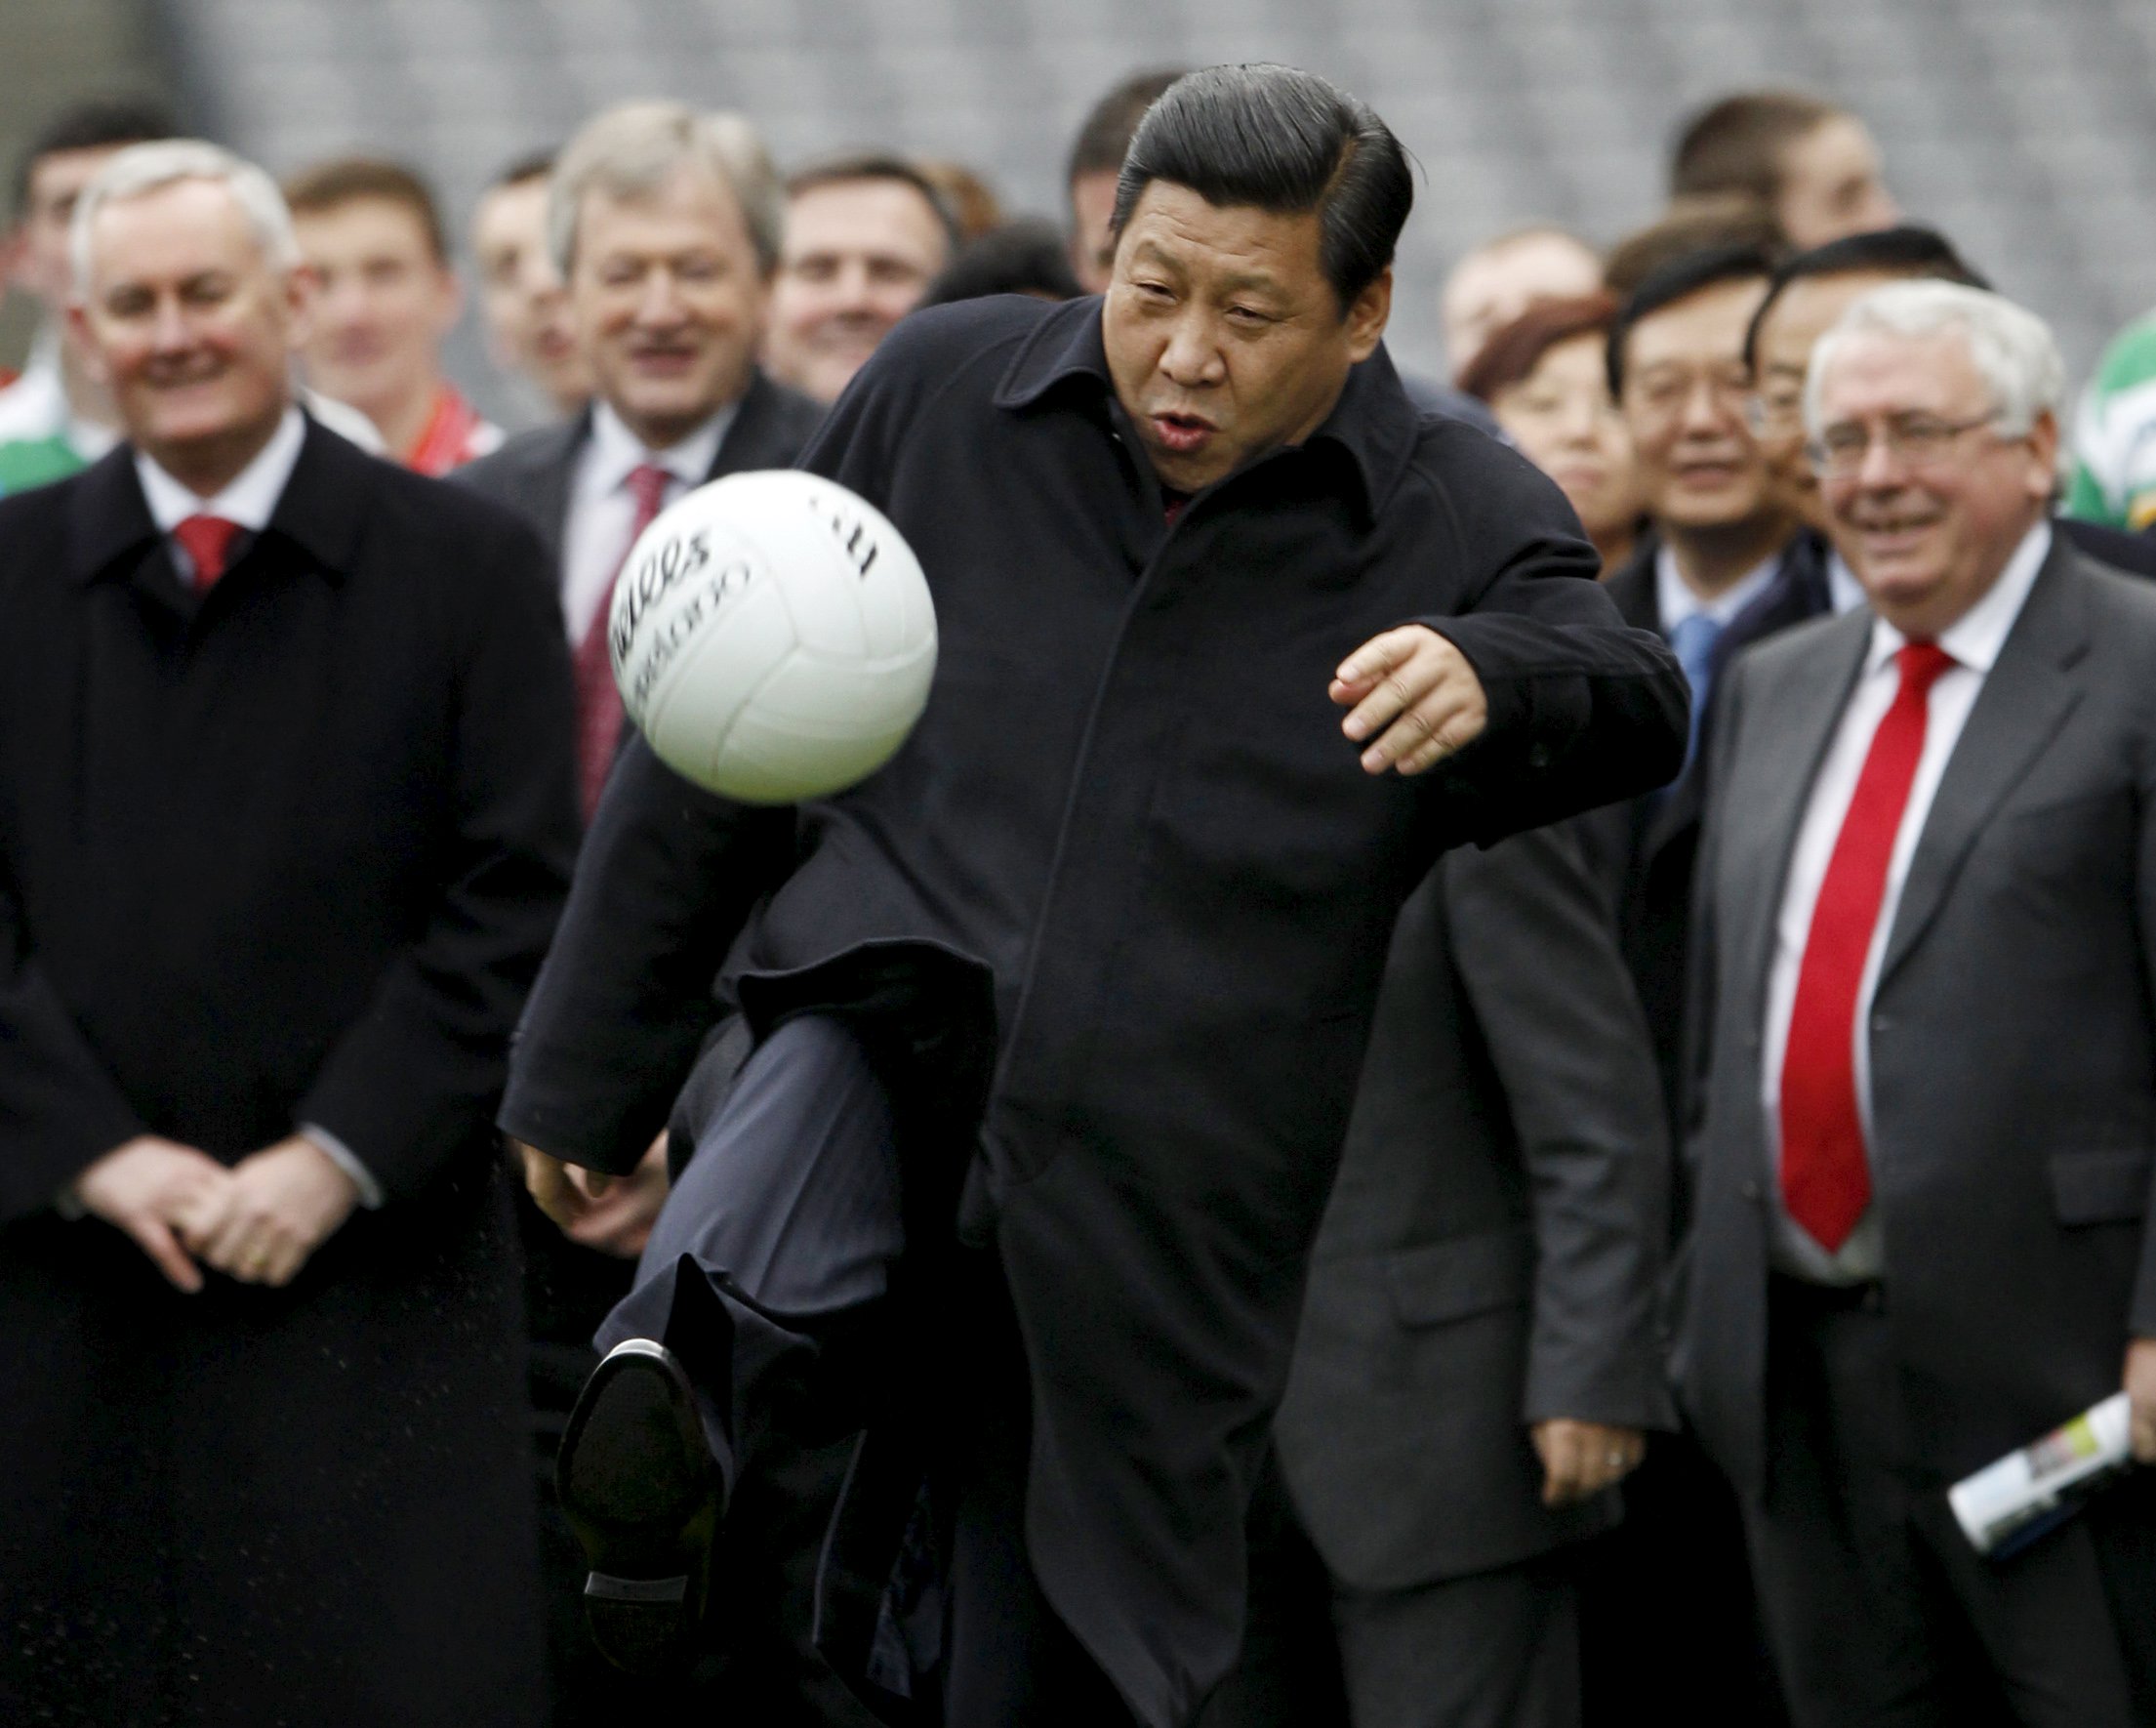 Xi Jinping kicking a football on a visit to Ireland in 2012. Photo: Reuters